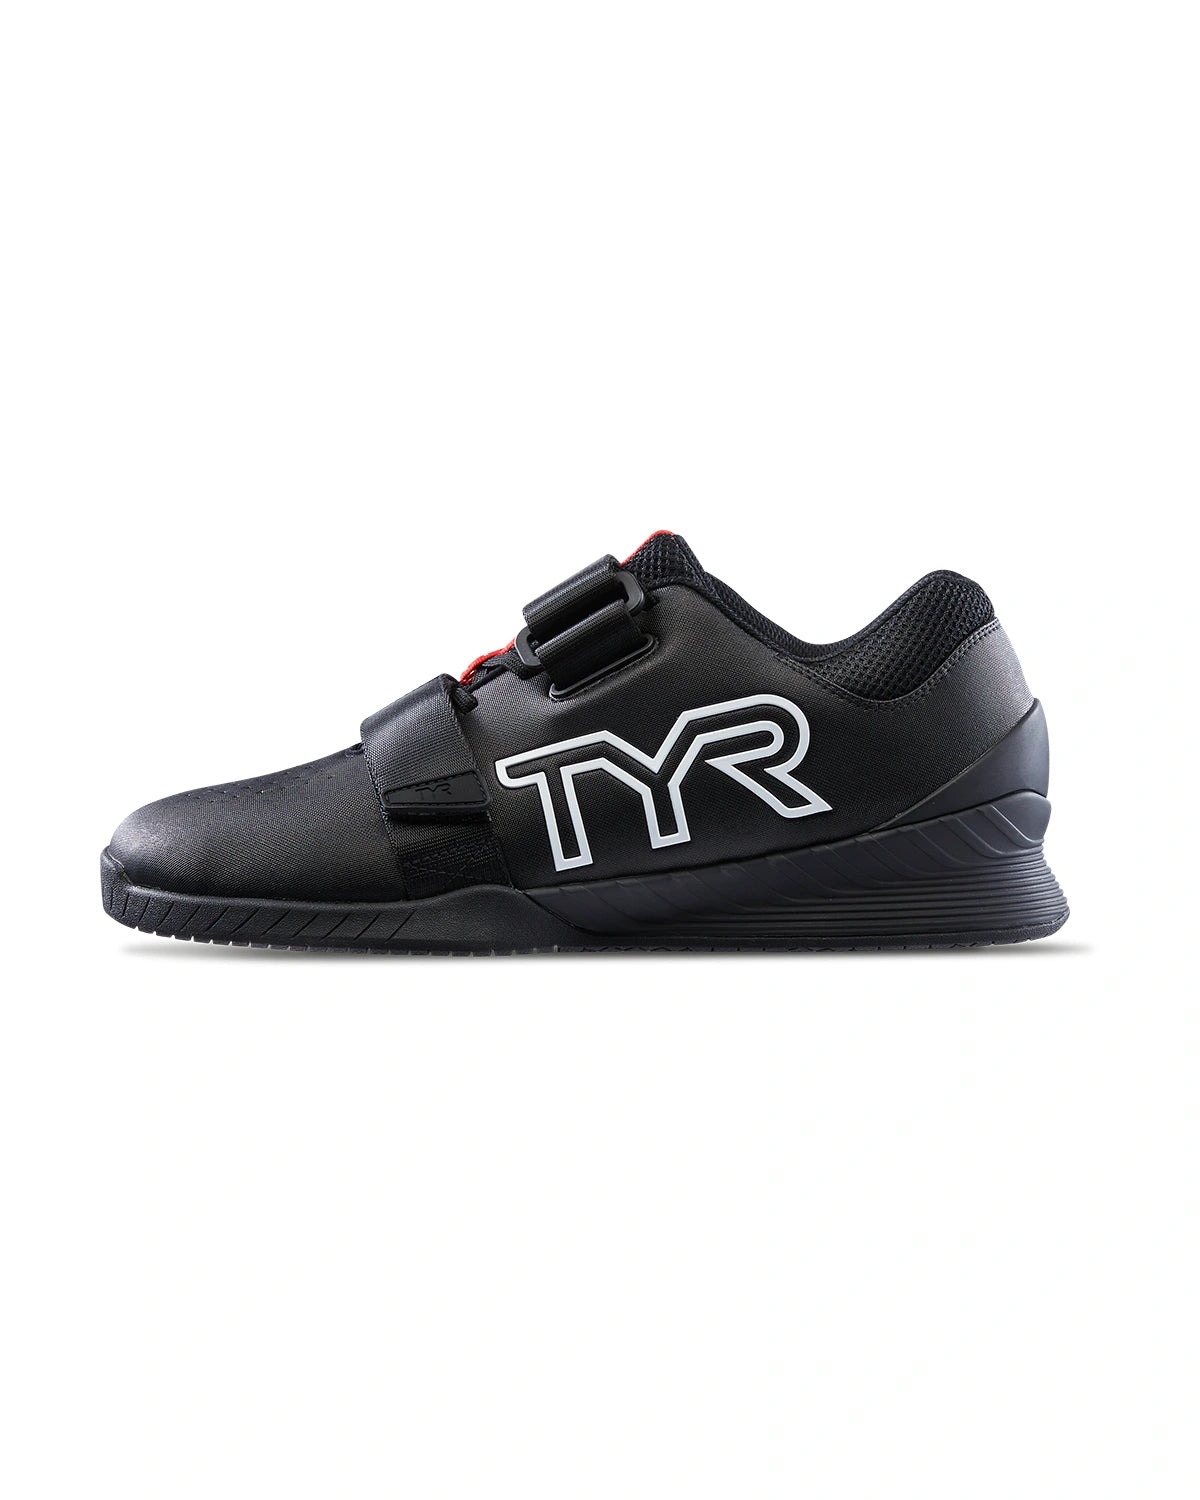 TYR L1 Lifter Weightlifting Shoe Black